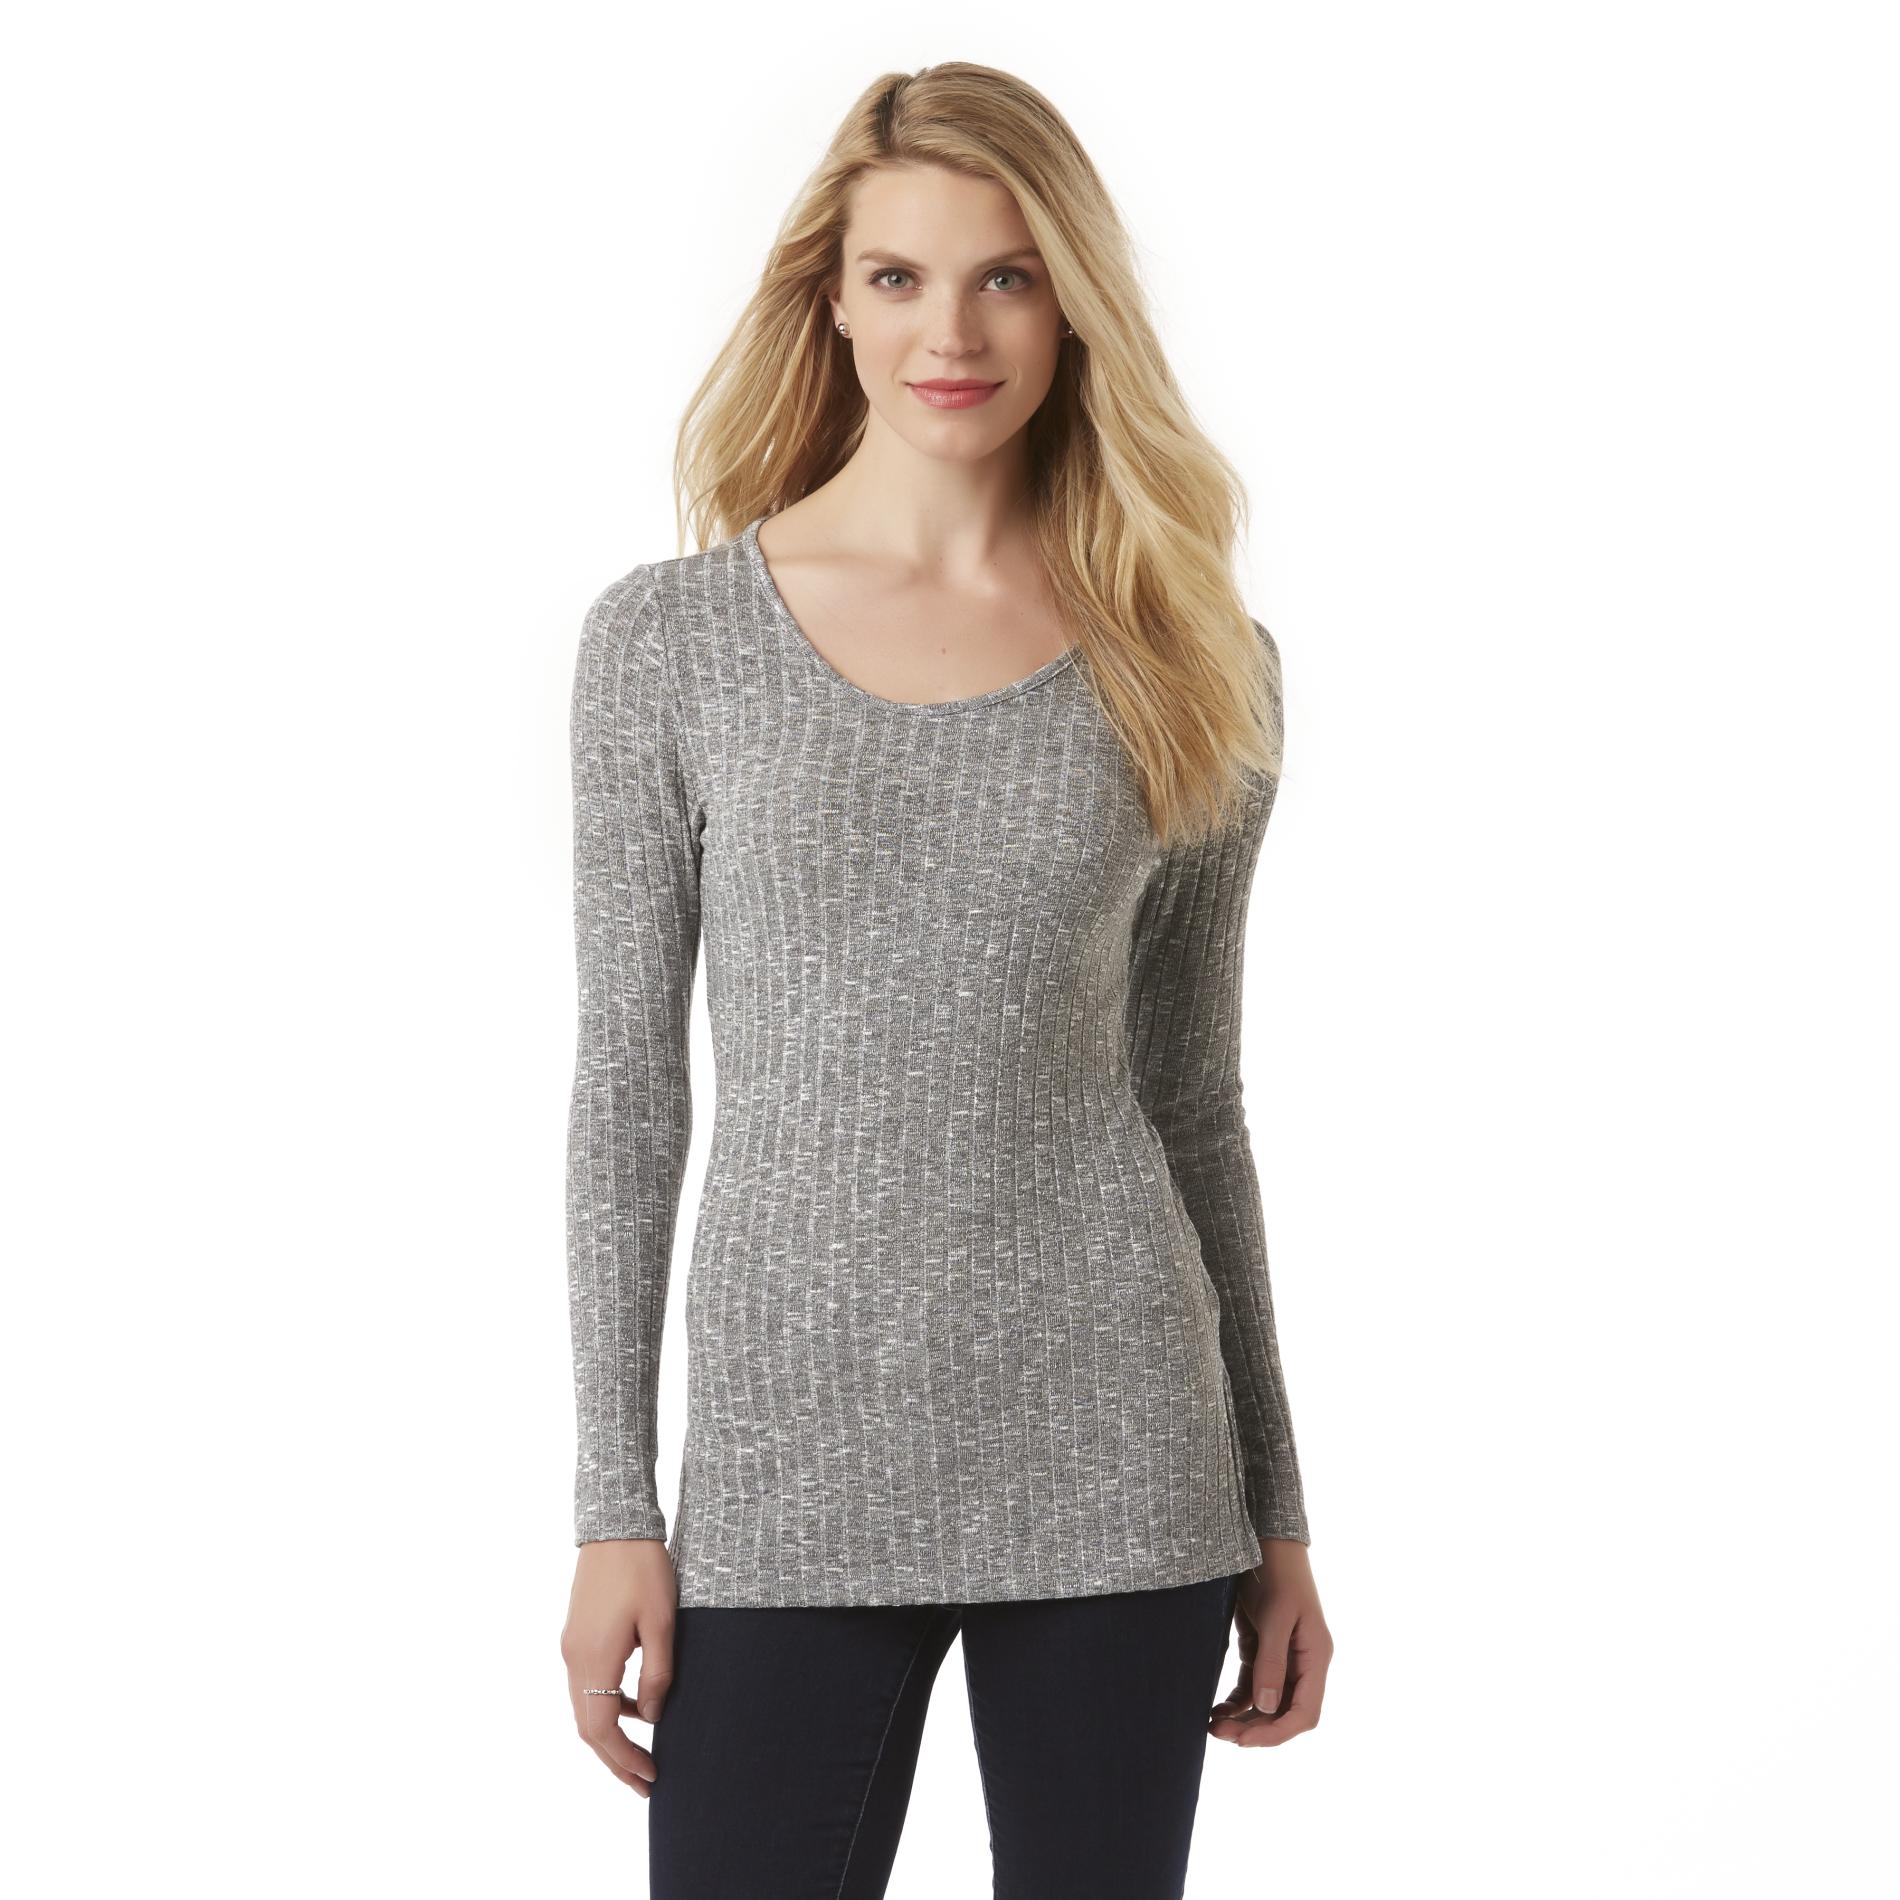 Simply Styled Women's Sweater - Ribbed